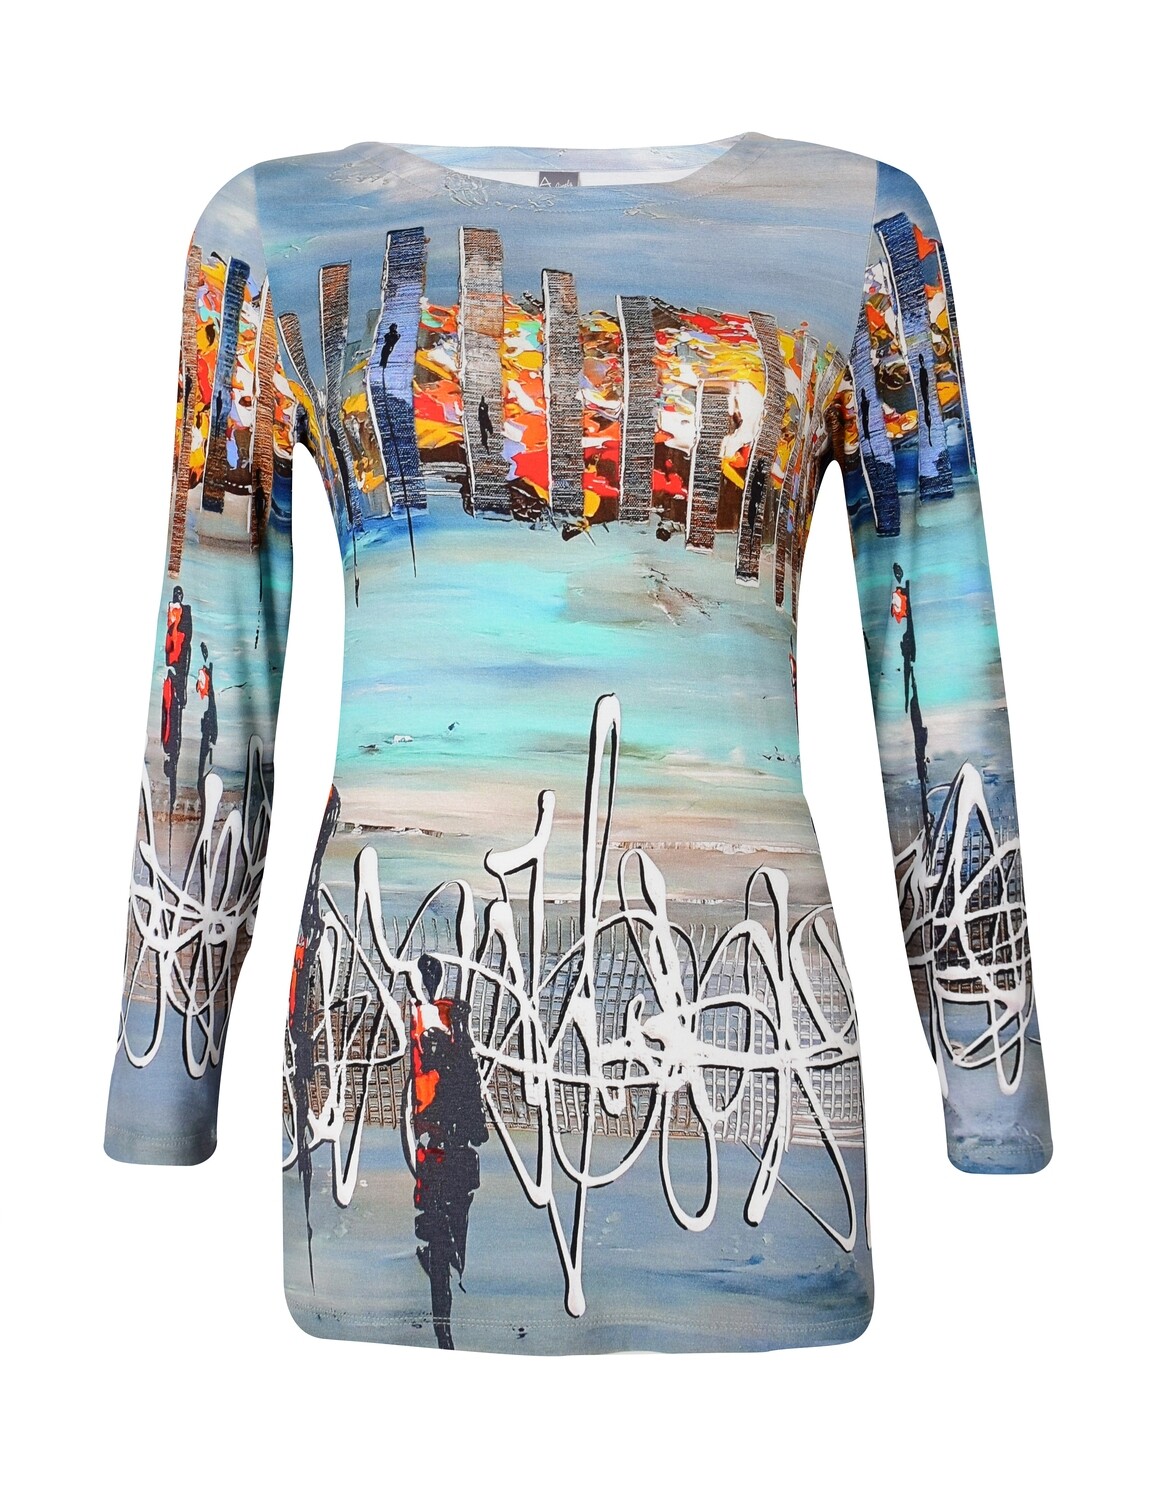 Simply Art Dolcezza: Indeed A Picture Perfect Beach Abstract Art Tunic SOLD OUT